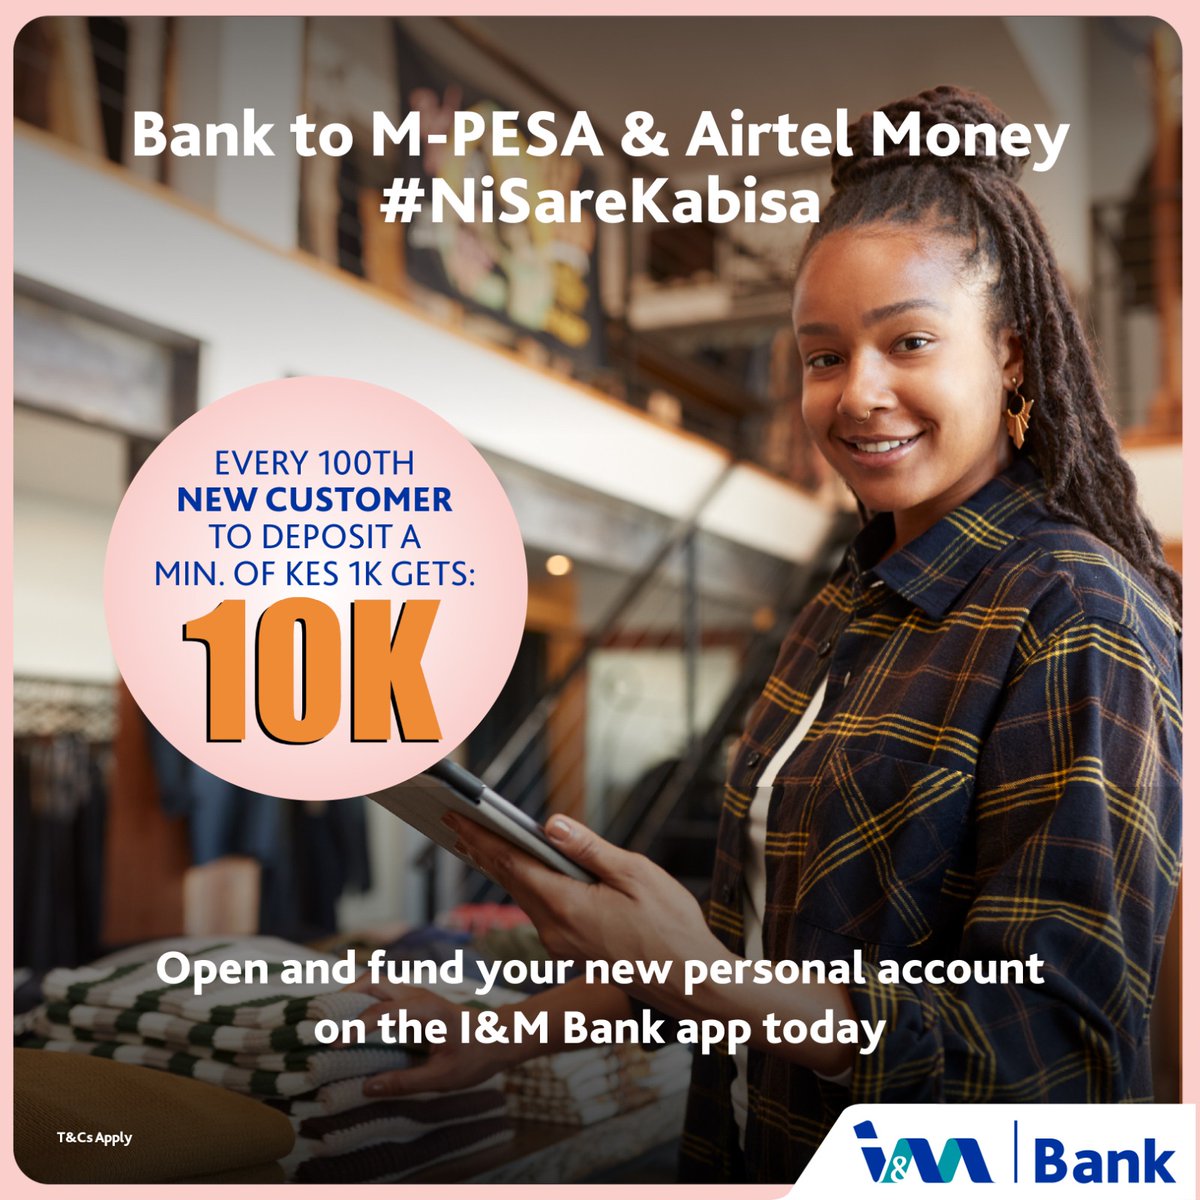 Take a step towards big wins! Open your IM Bank personal account, fund it with 1k, and you could be the lucky 100th customer to claim an attractive 10k. Don't forget the added benefit of Free Bank to Mpesa and Airtel Money transactions!
#NiSareKabisa